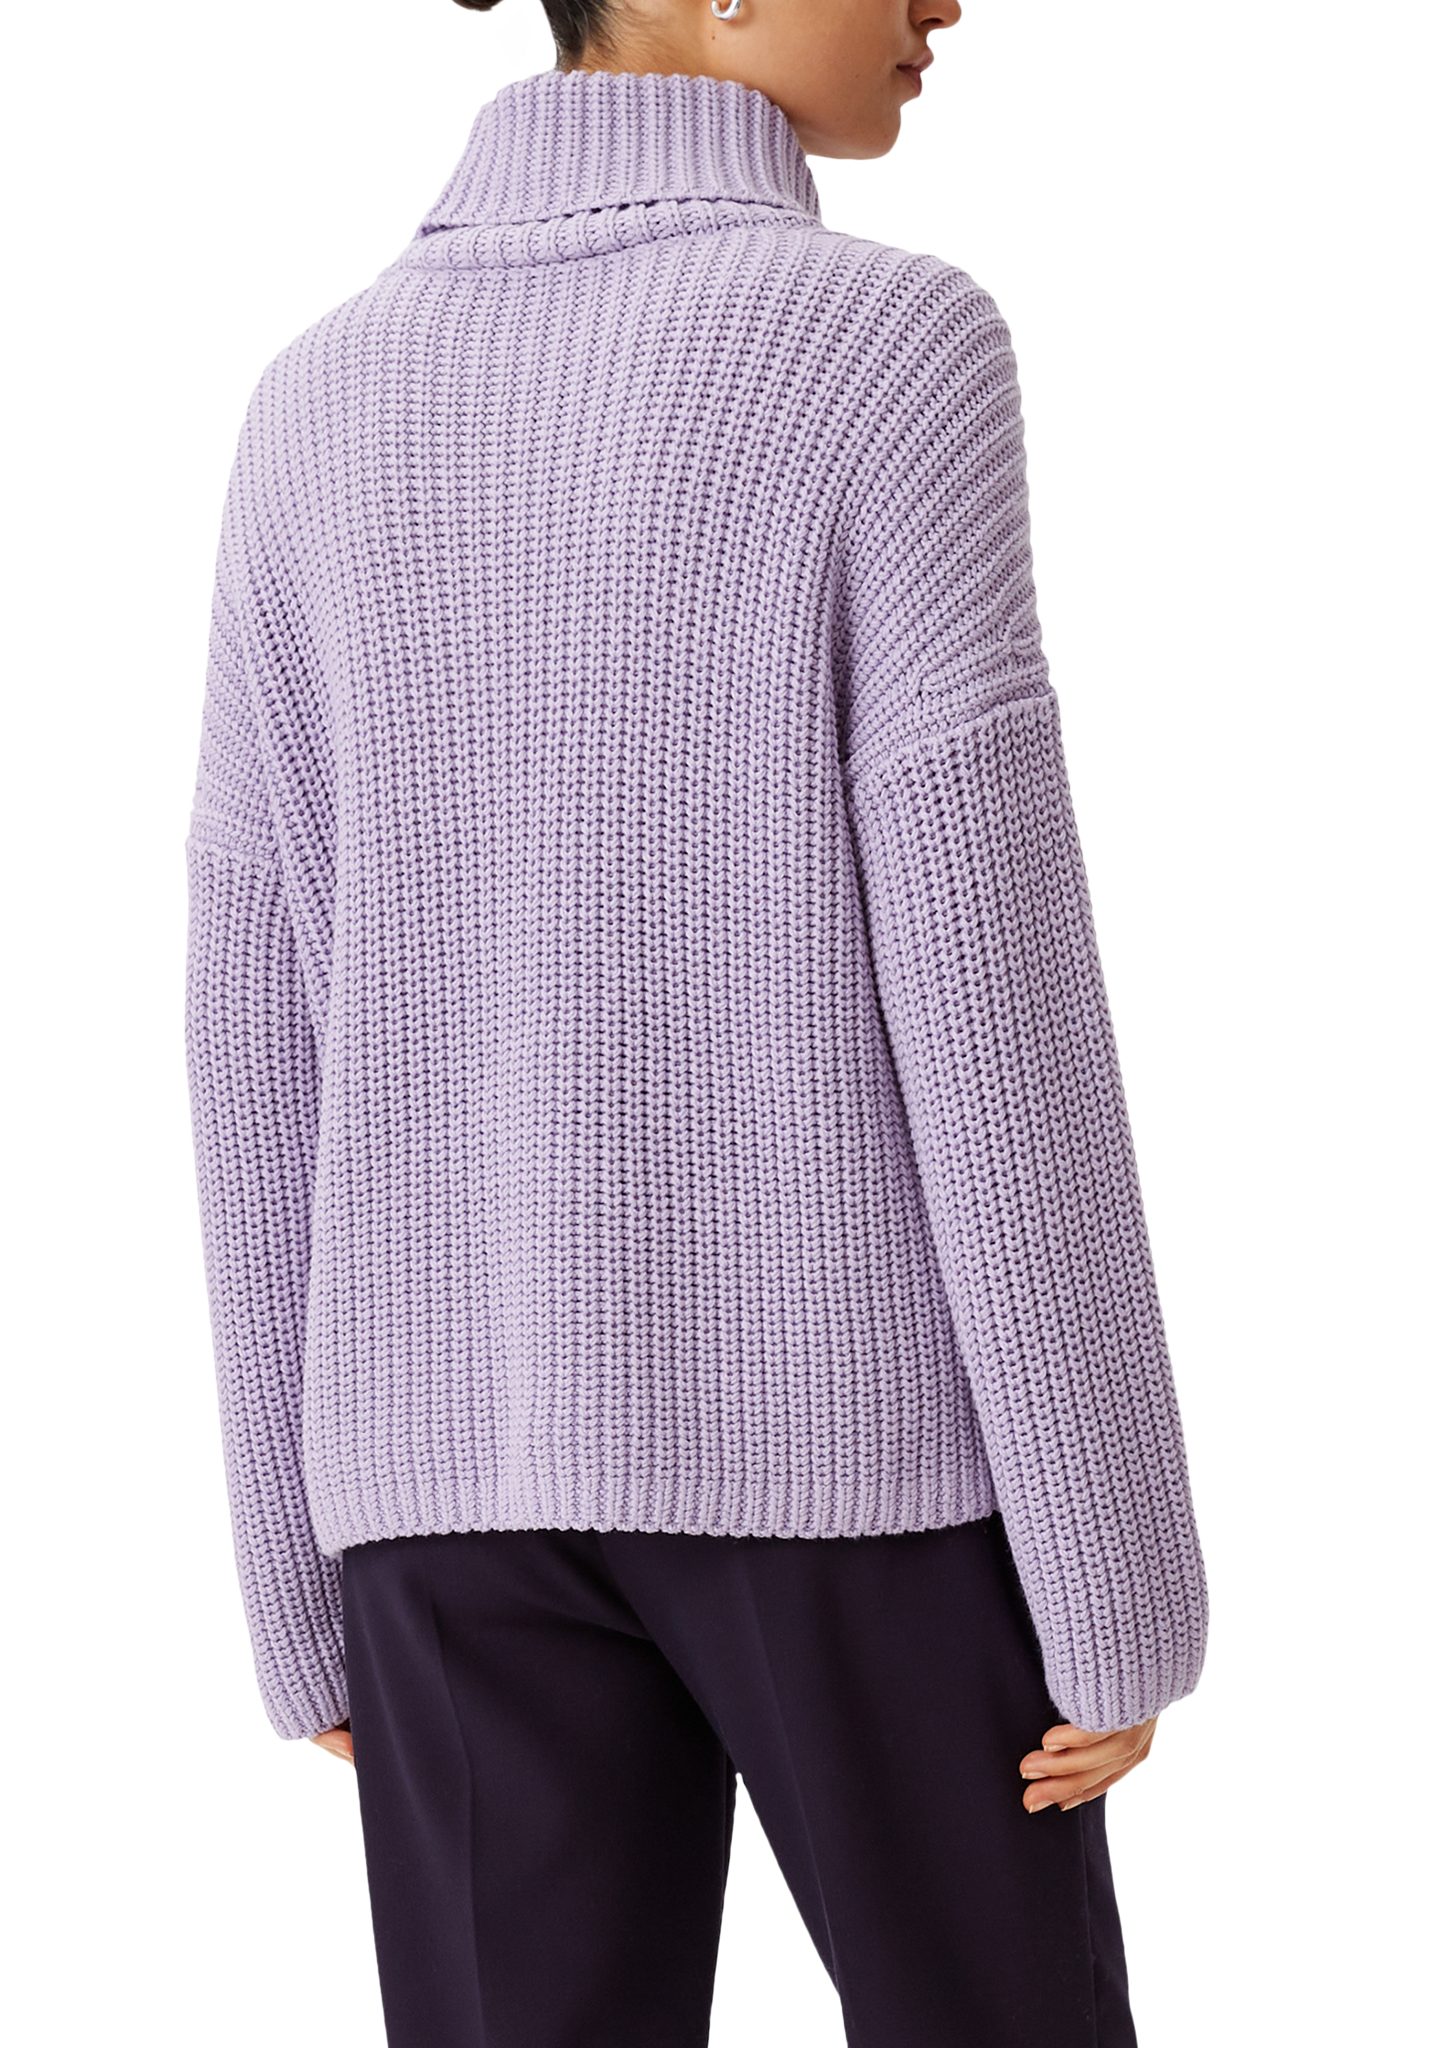 Rippstrickpullover lavendel identity Langarmshirt mit casual Label-Patch comma Label-Patch